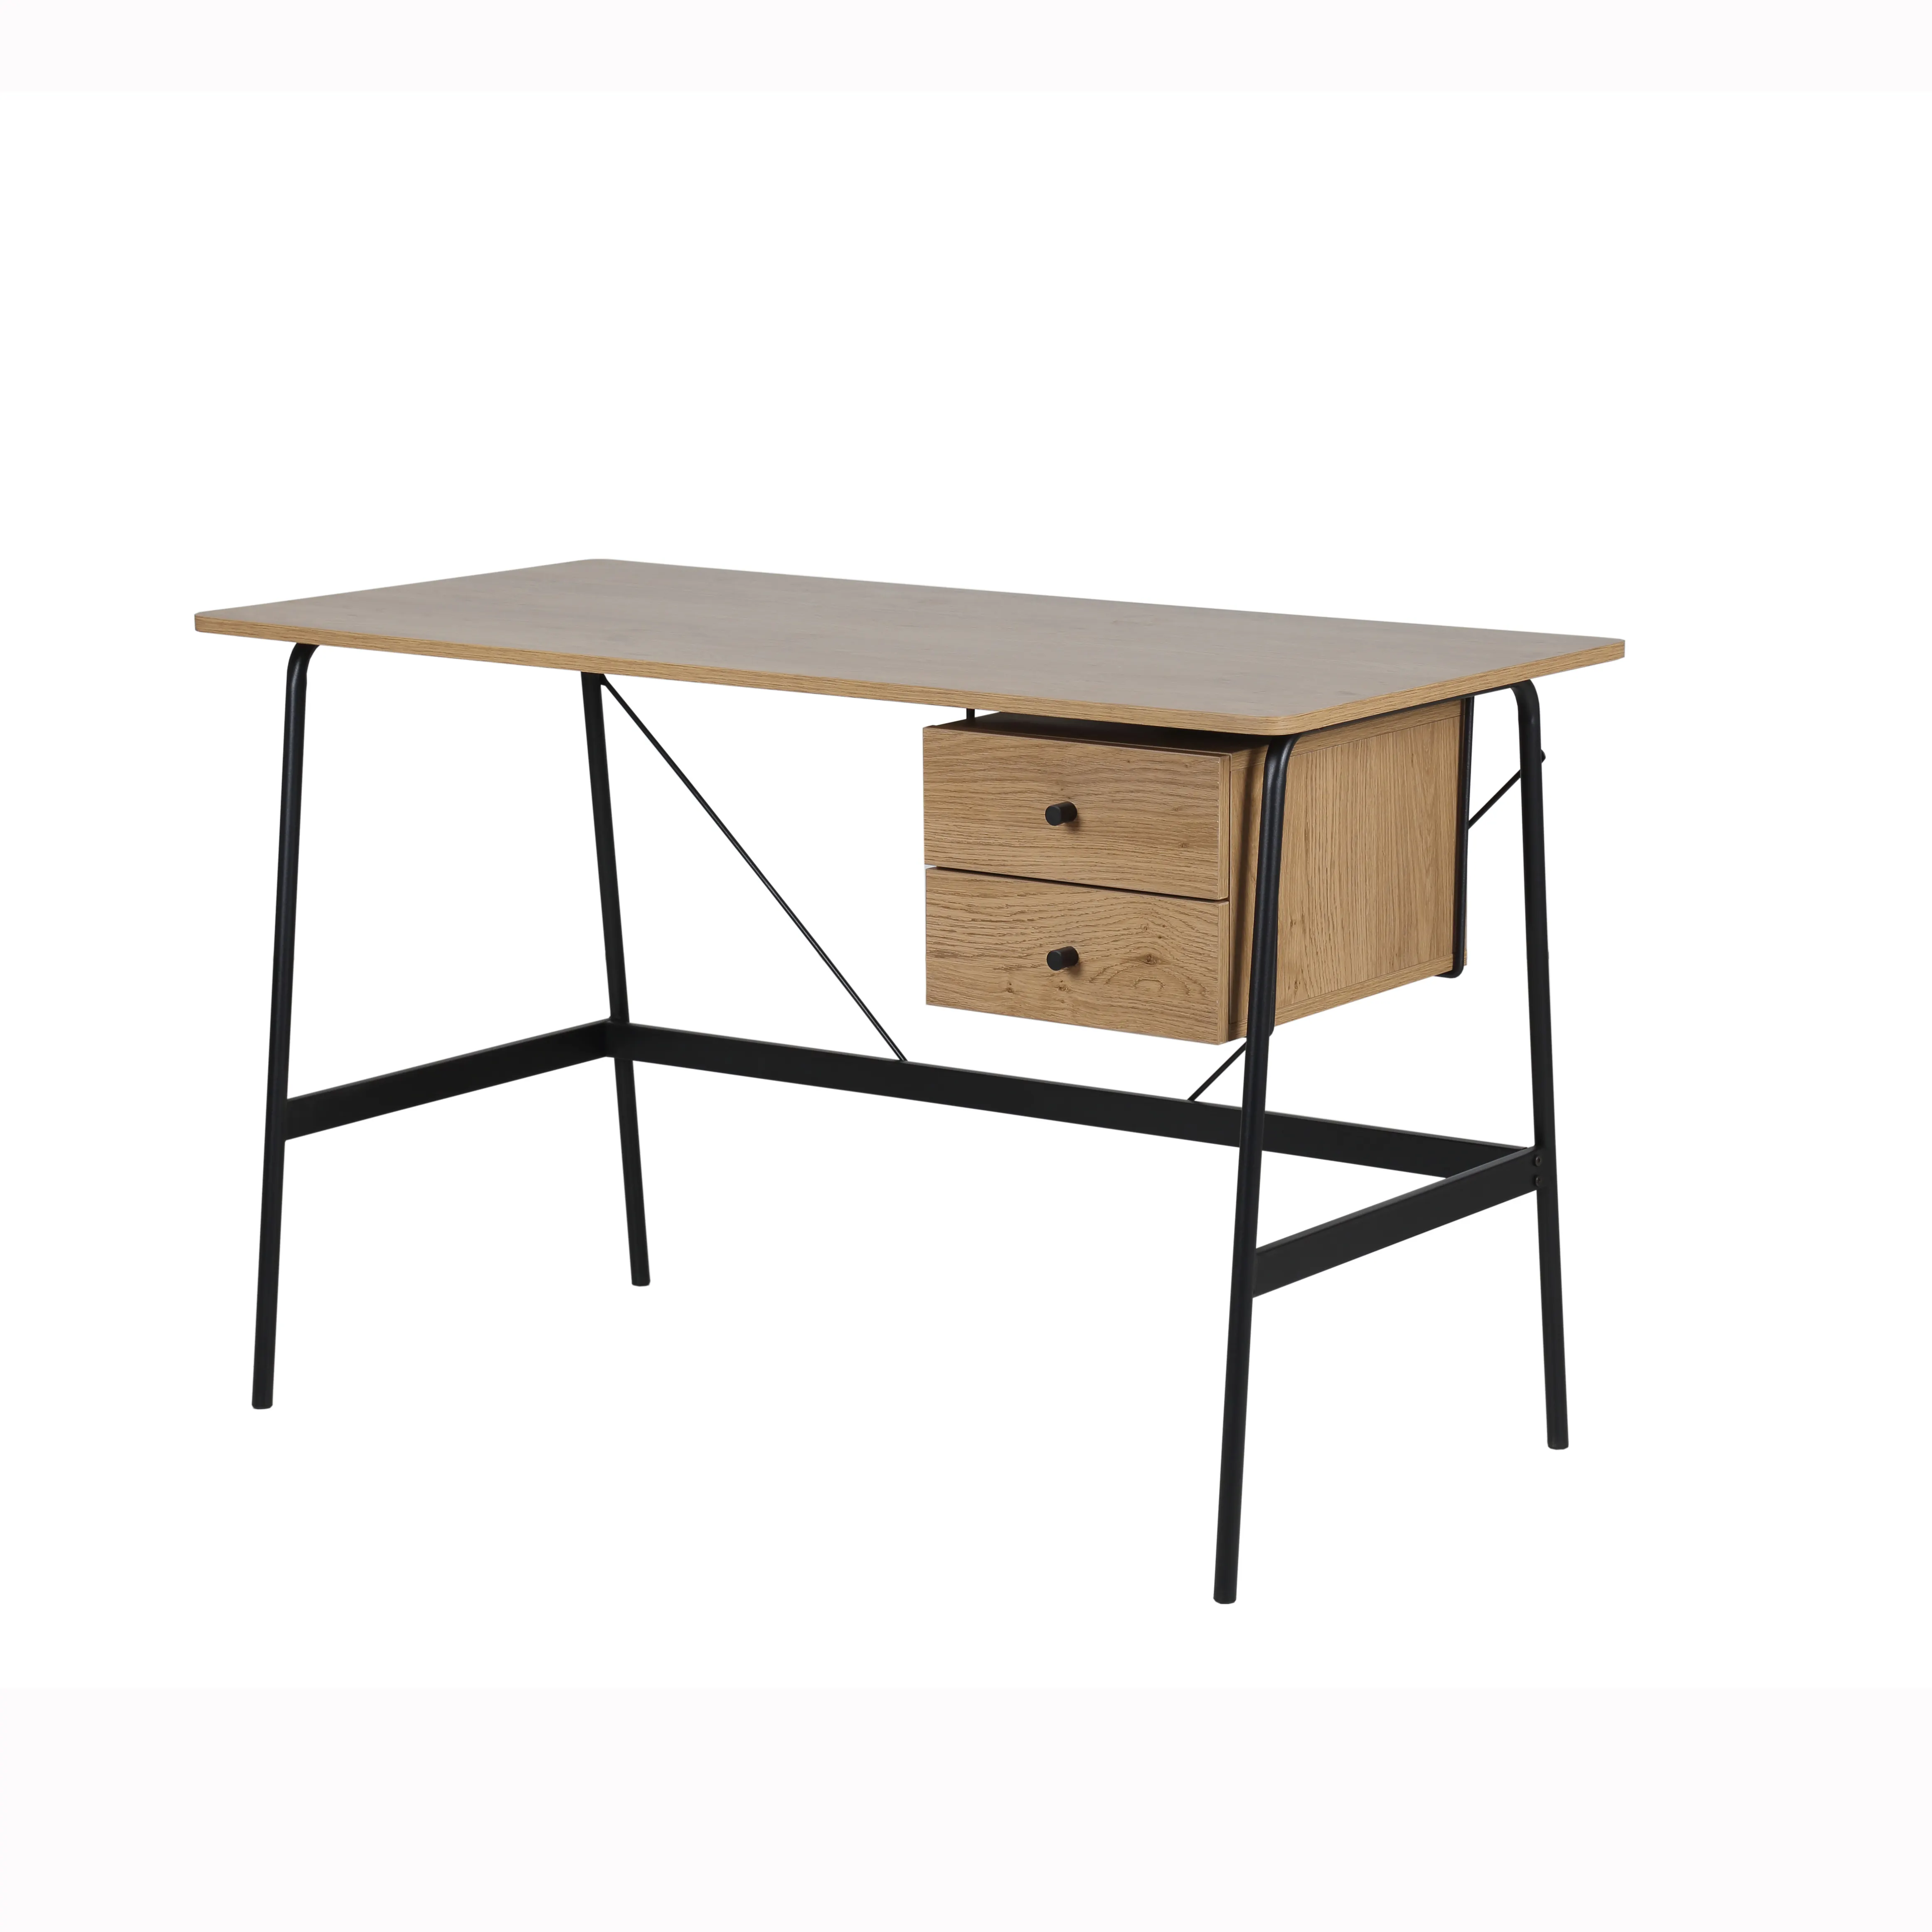 Modern wooden gold customized office furniture storage laptop 2 drawers working desk table high tech sale PC computer desk